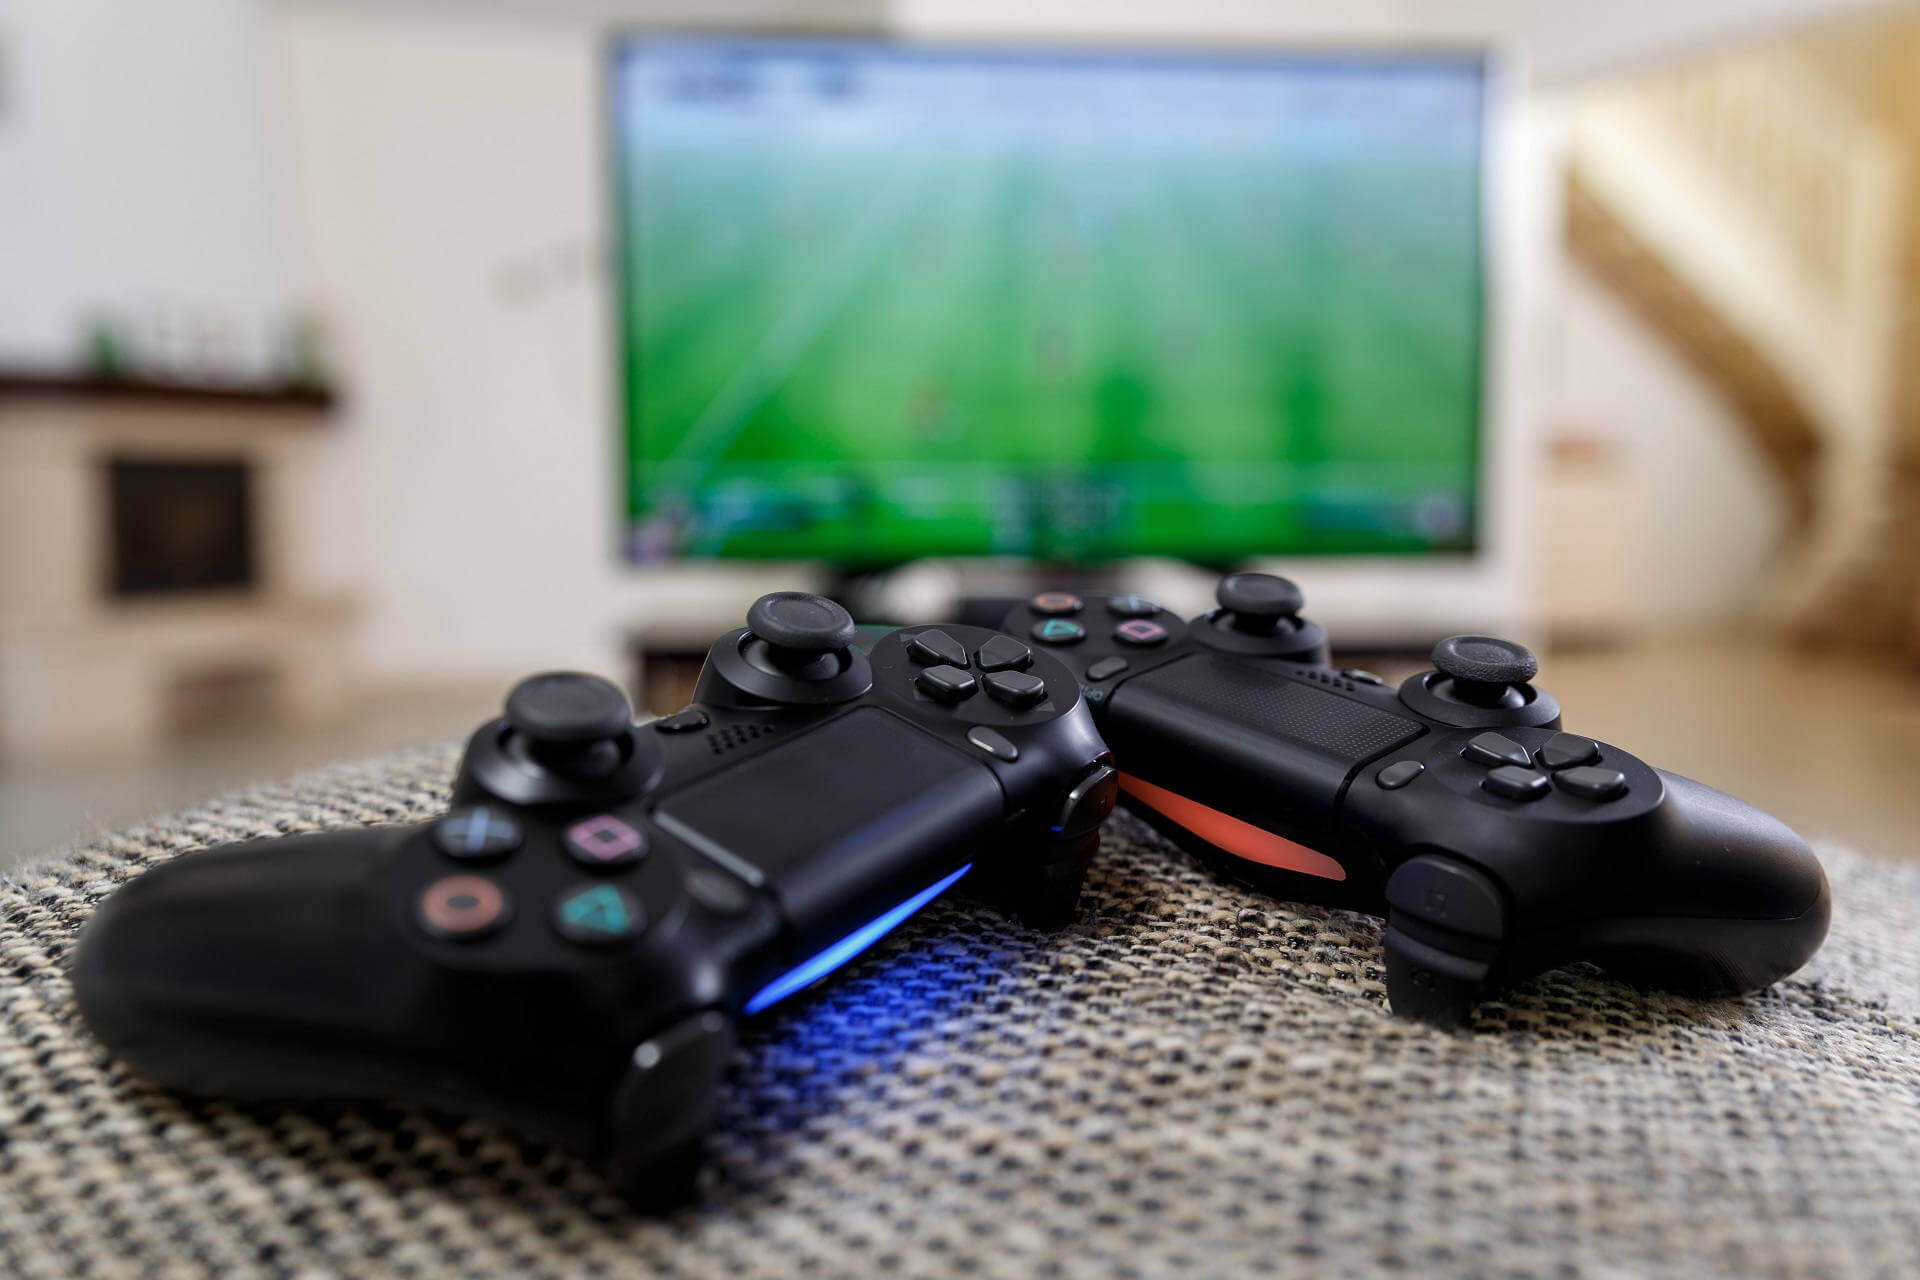 How to connect a PS4 controller to Windows 10